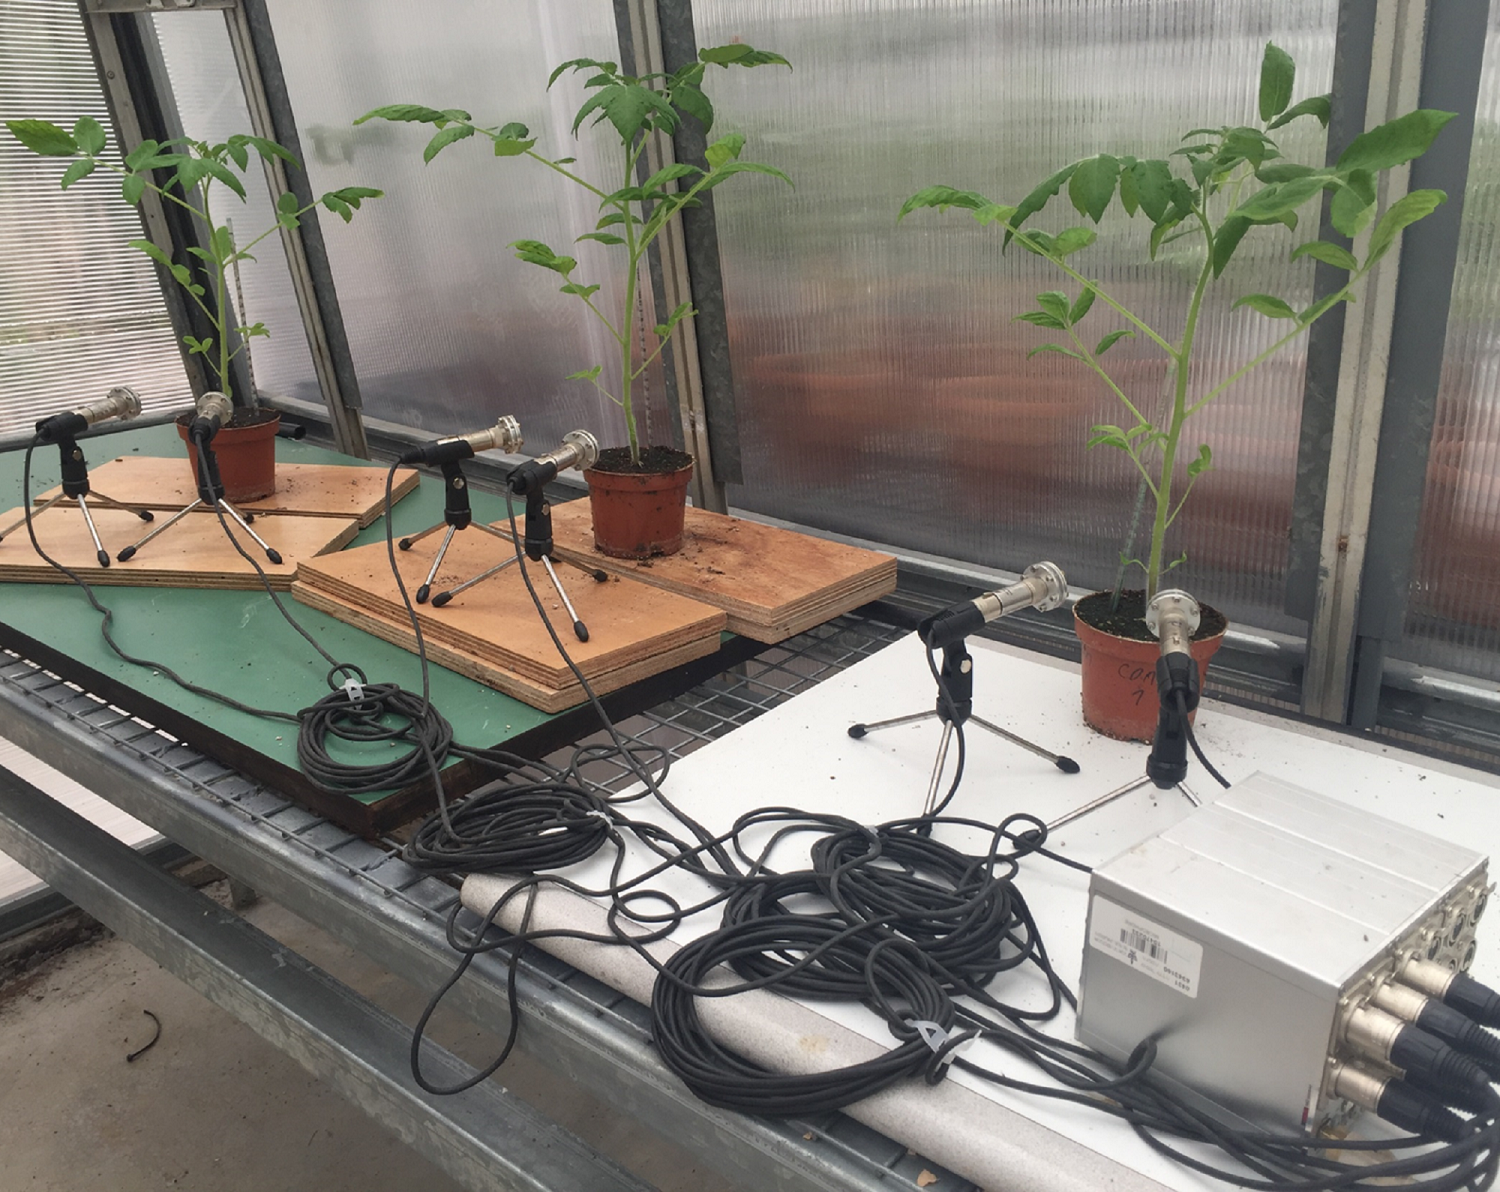 Three tomato plants in a greenhouse with a microphone in front of them